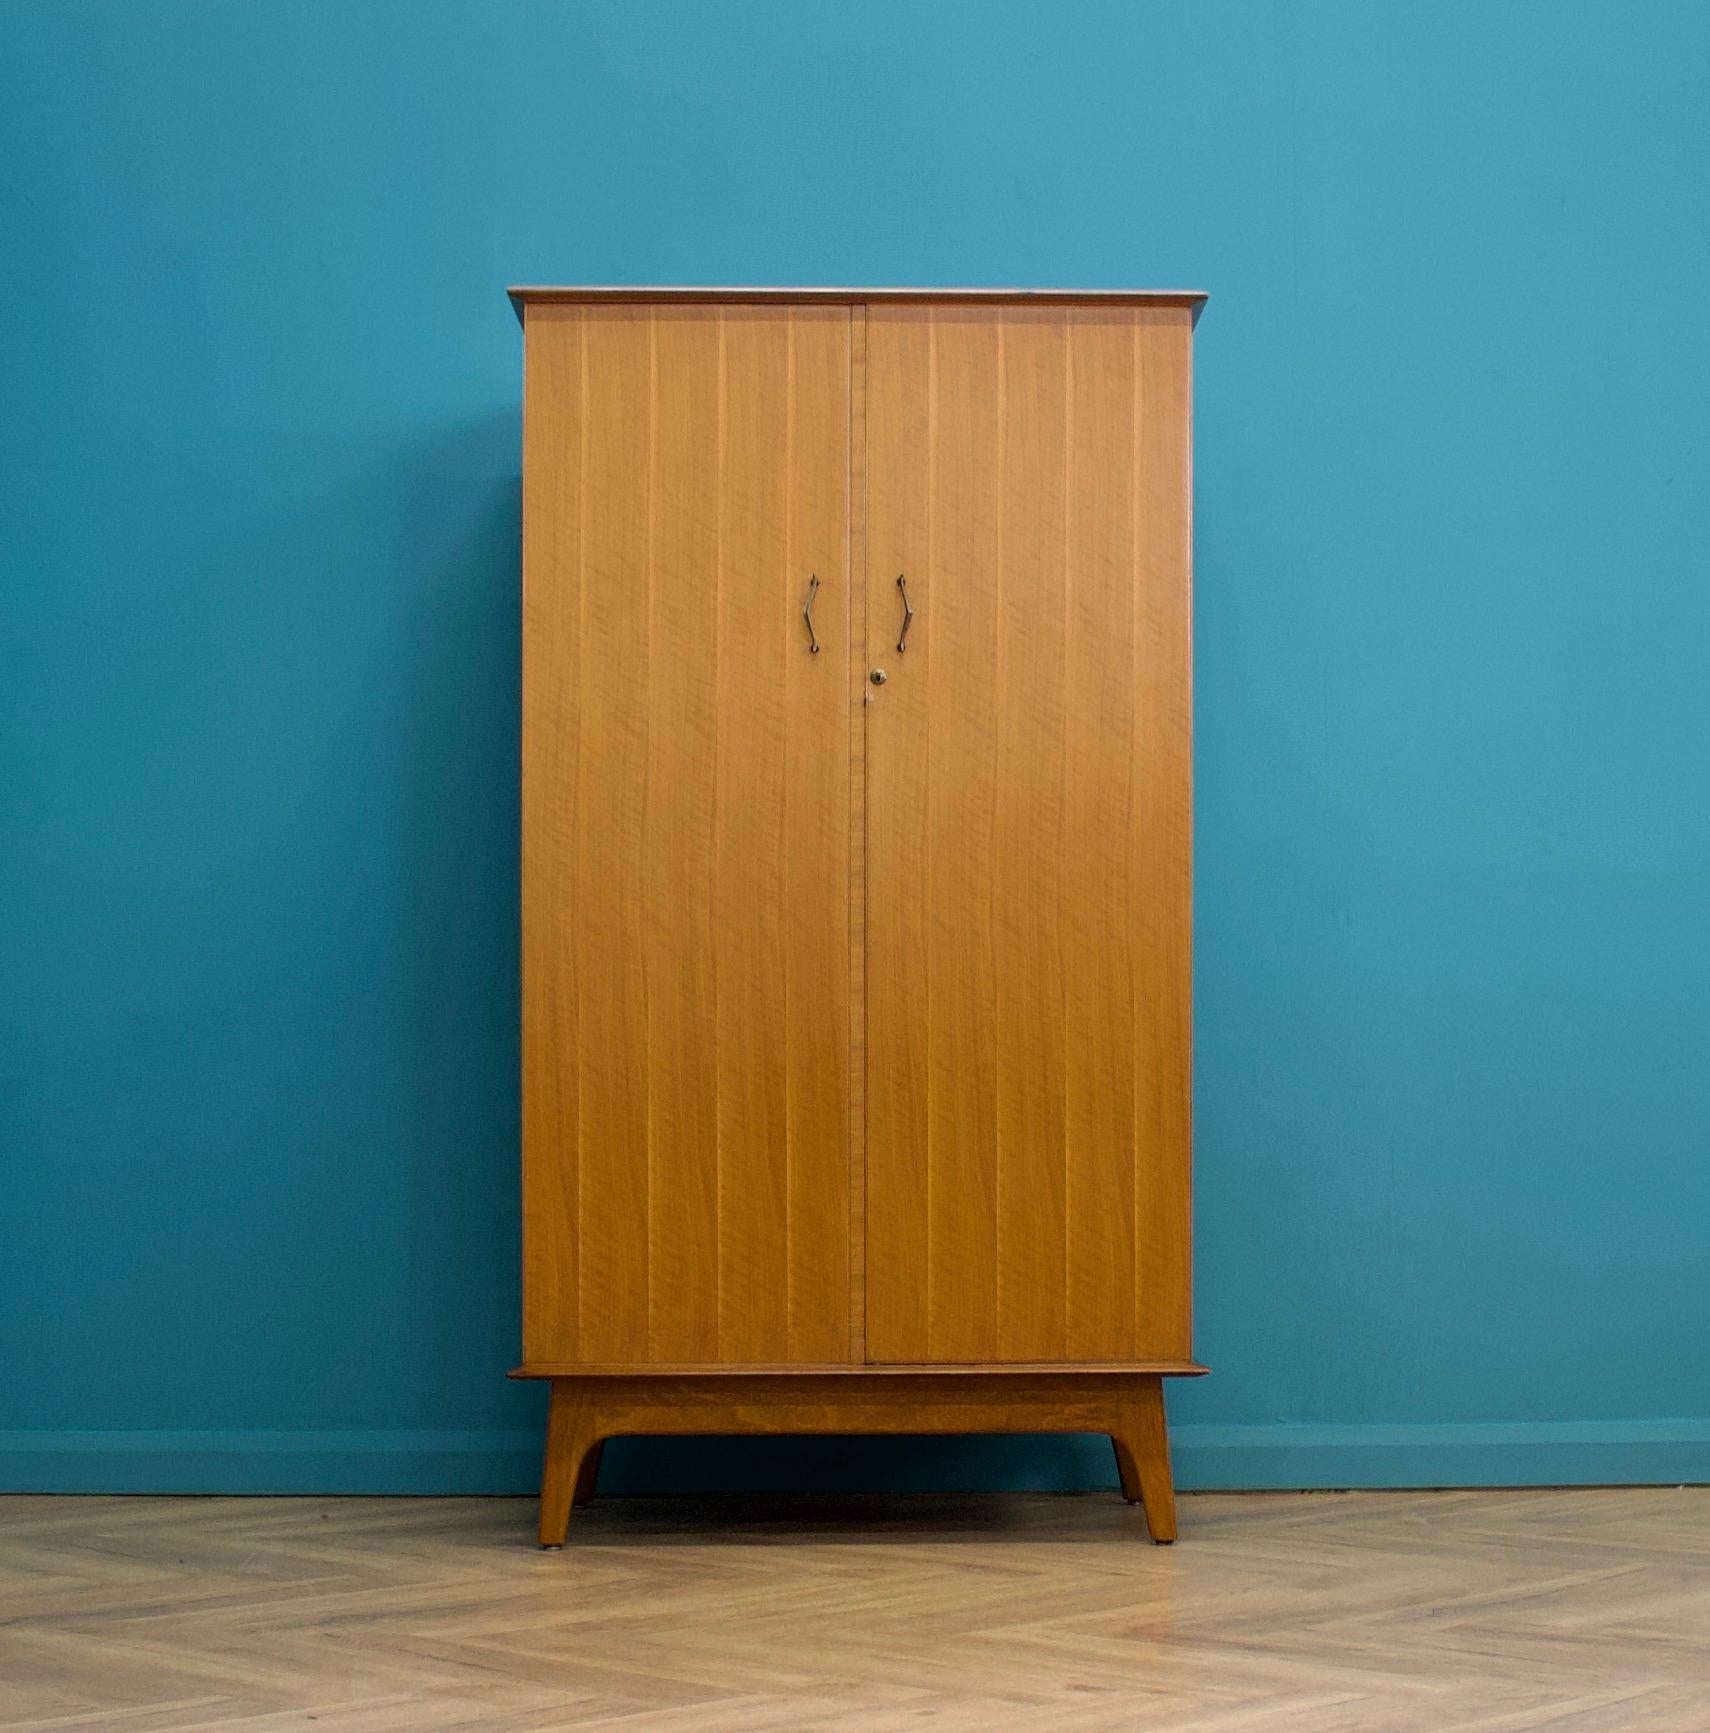 A walnut freestanding wardrobe by Alfred Cox - these pieces were usually retailed through Heals department store during the 1950s and 1960s
Internally there is a hanging rail and shelves
The attractive legs are splayed and the handles are solid wood